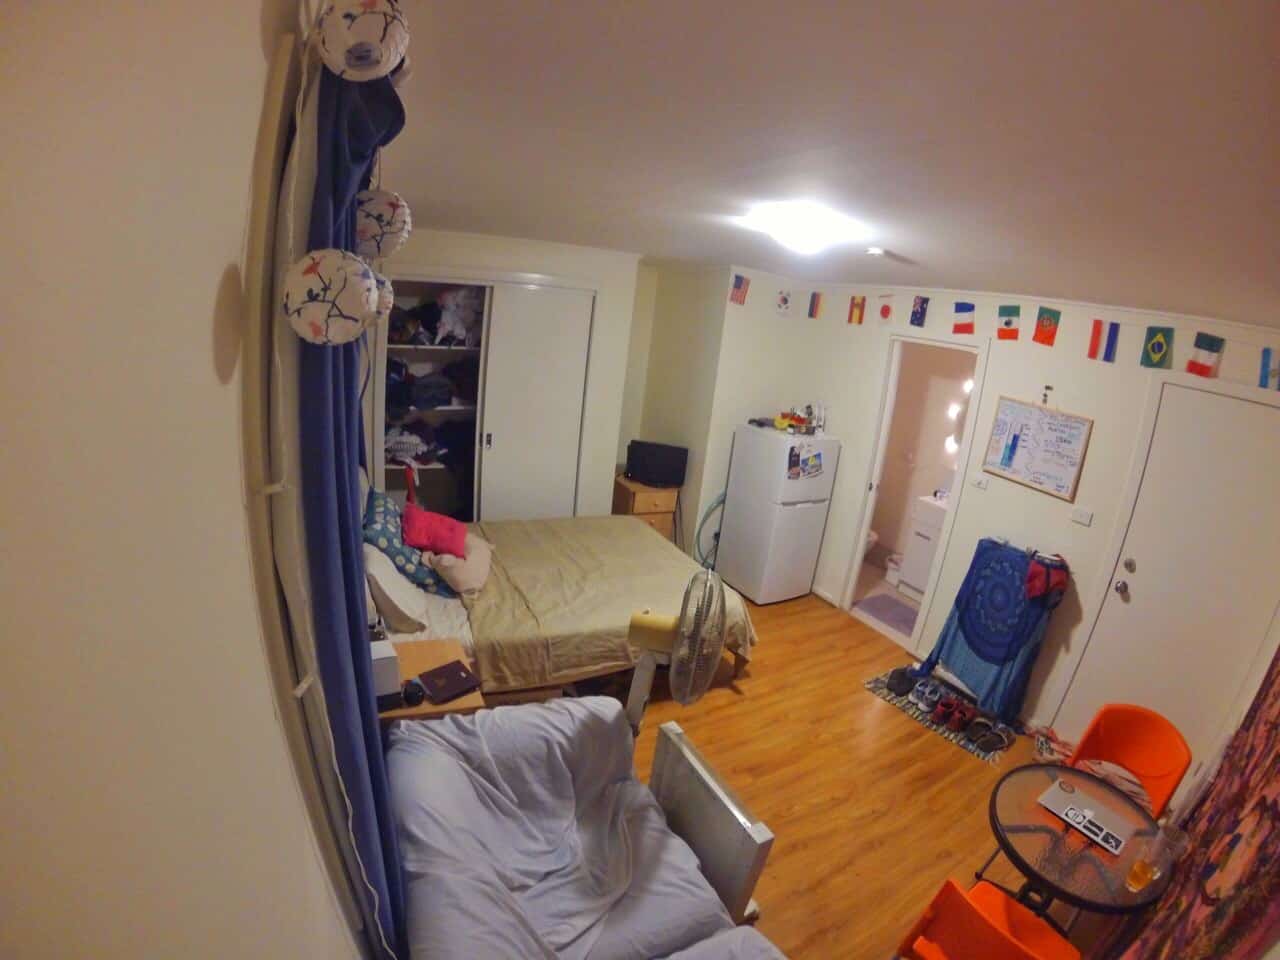 My apartment in Melbourne, it's really small.